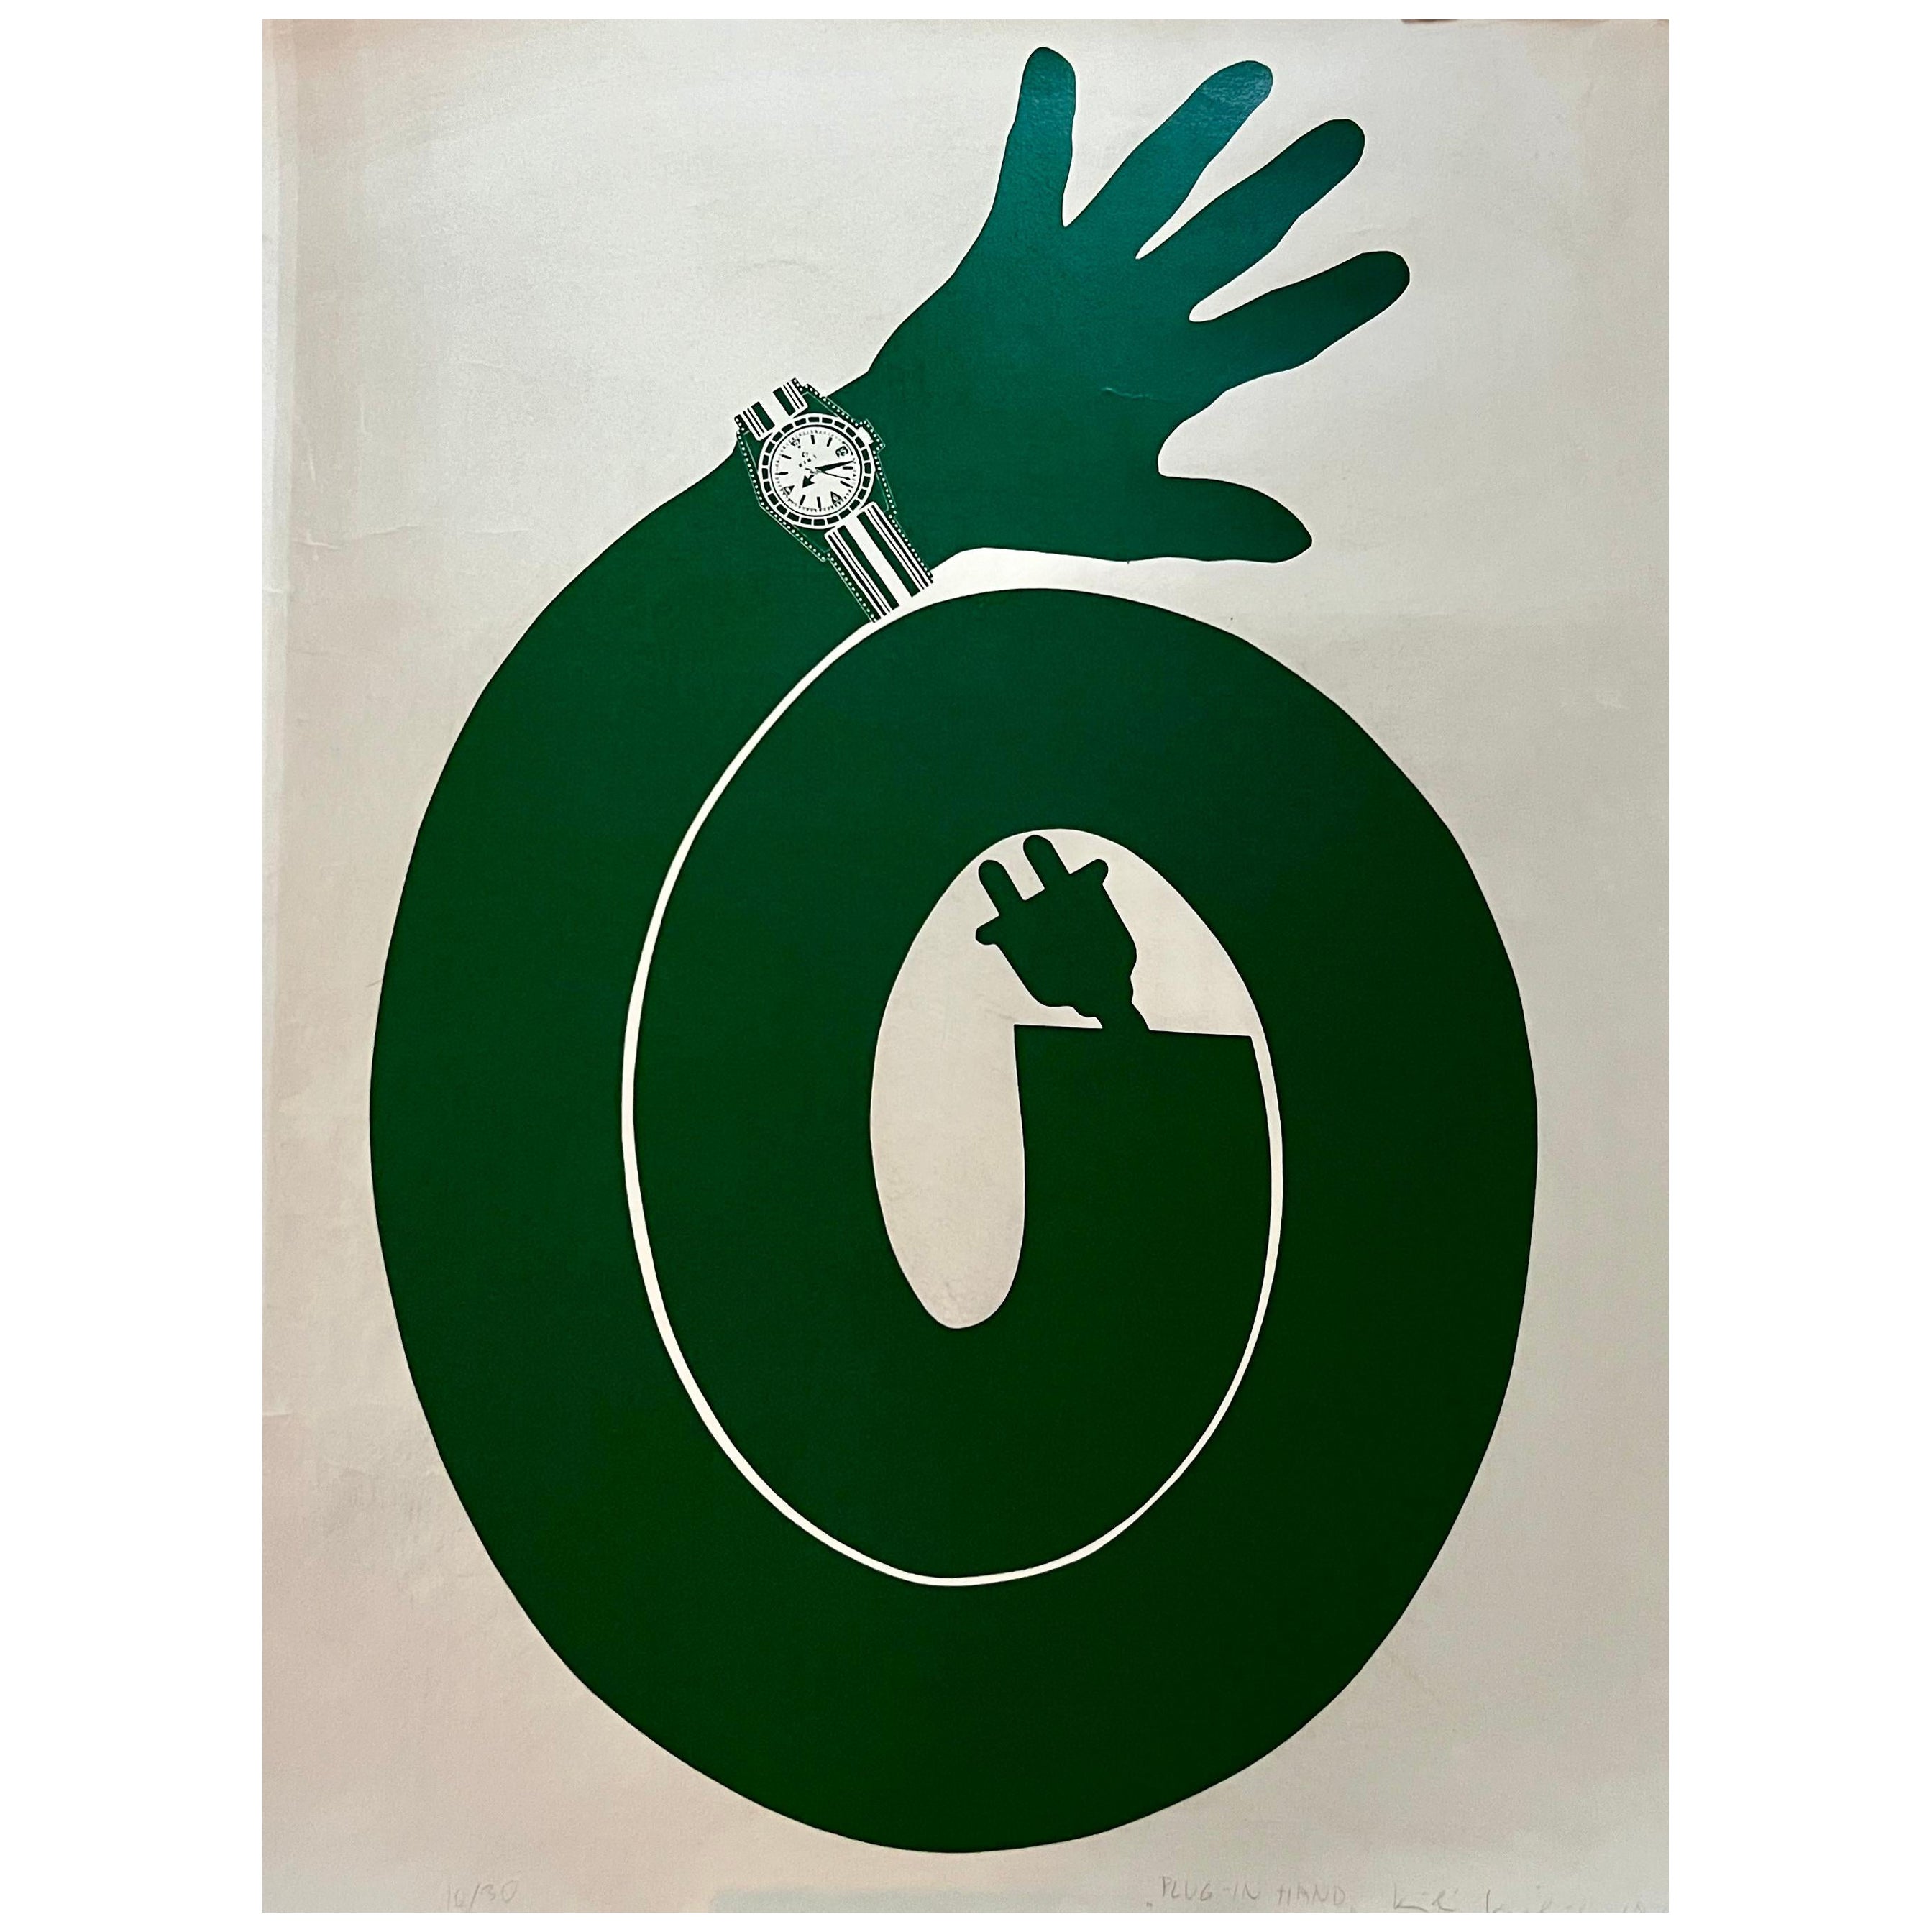 Plug in Hand Silkscreen on Paper Signed Lithography by Kiki Kogelnik in 1968 For Sale